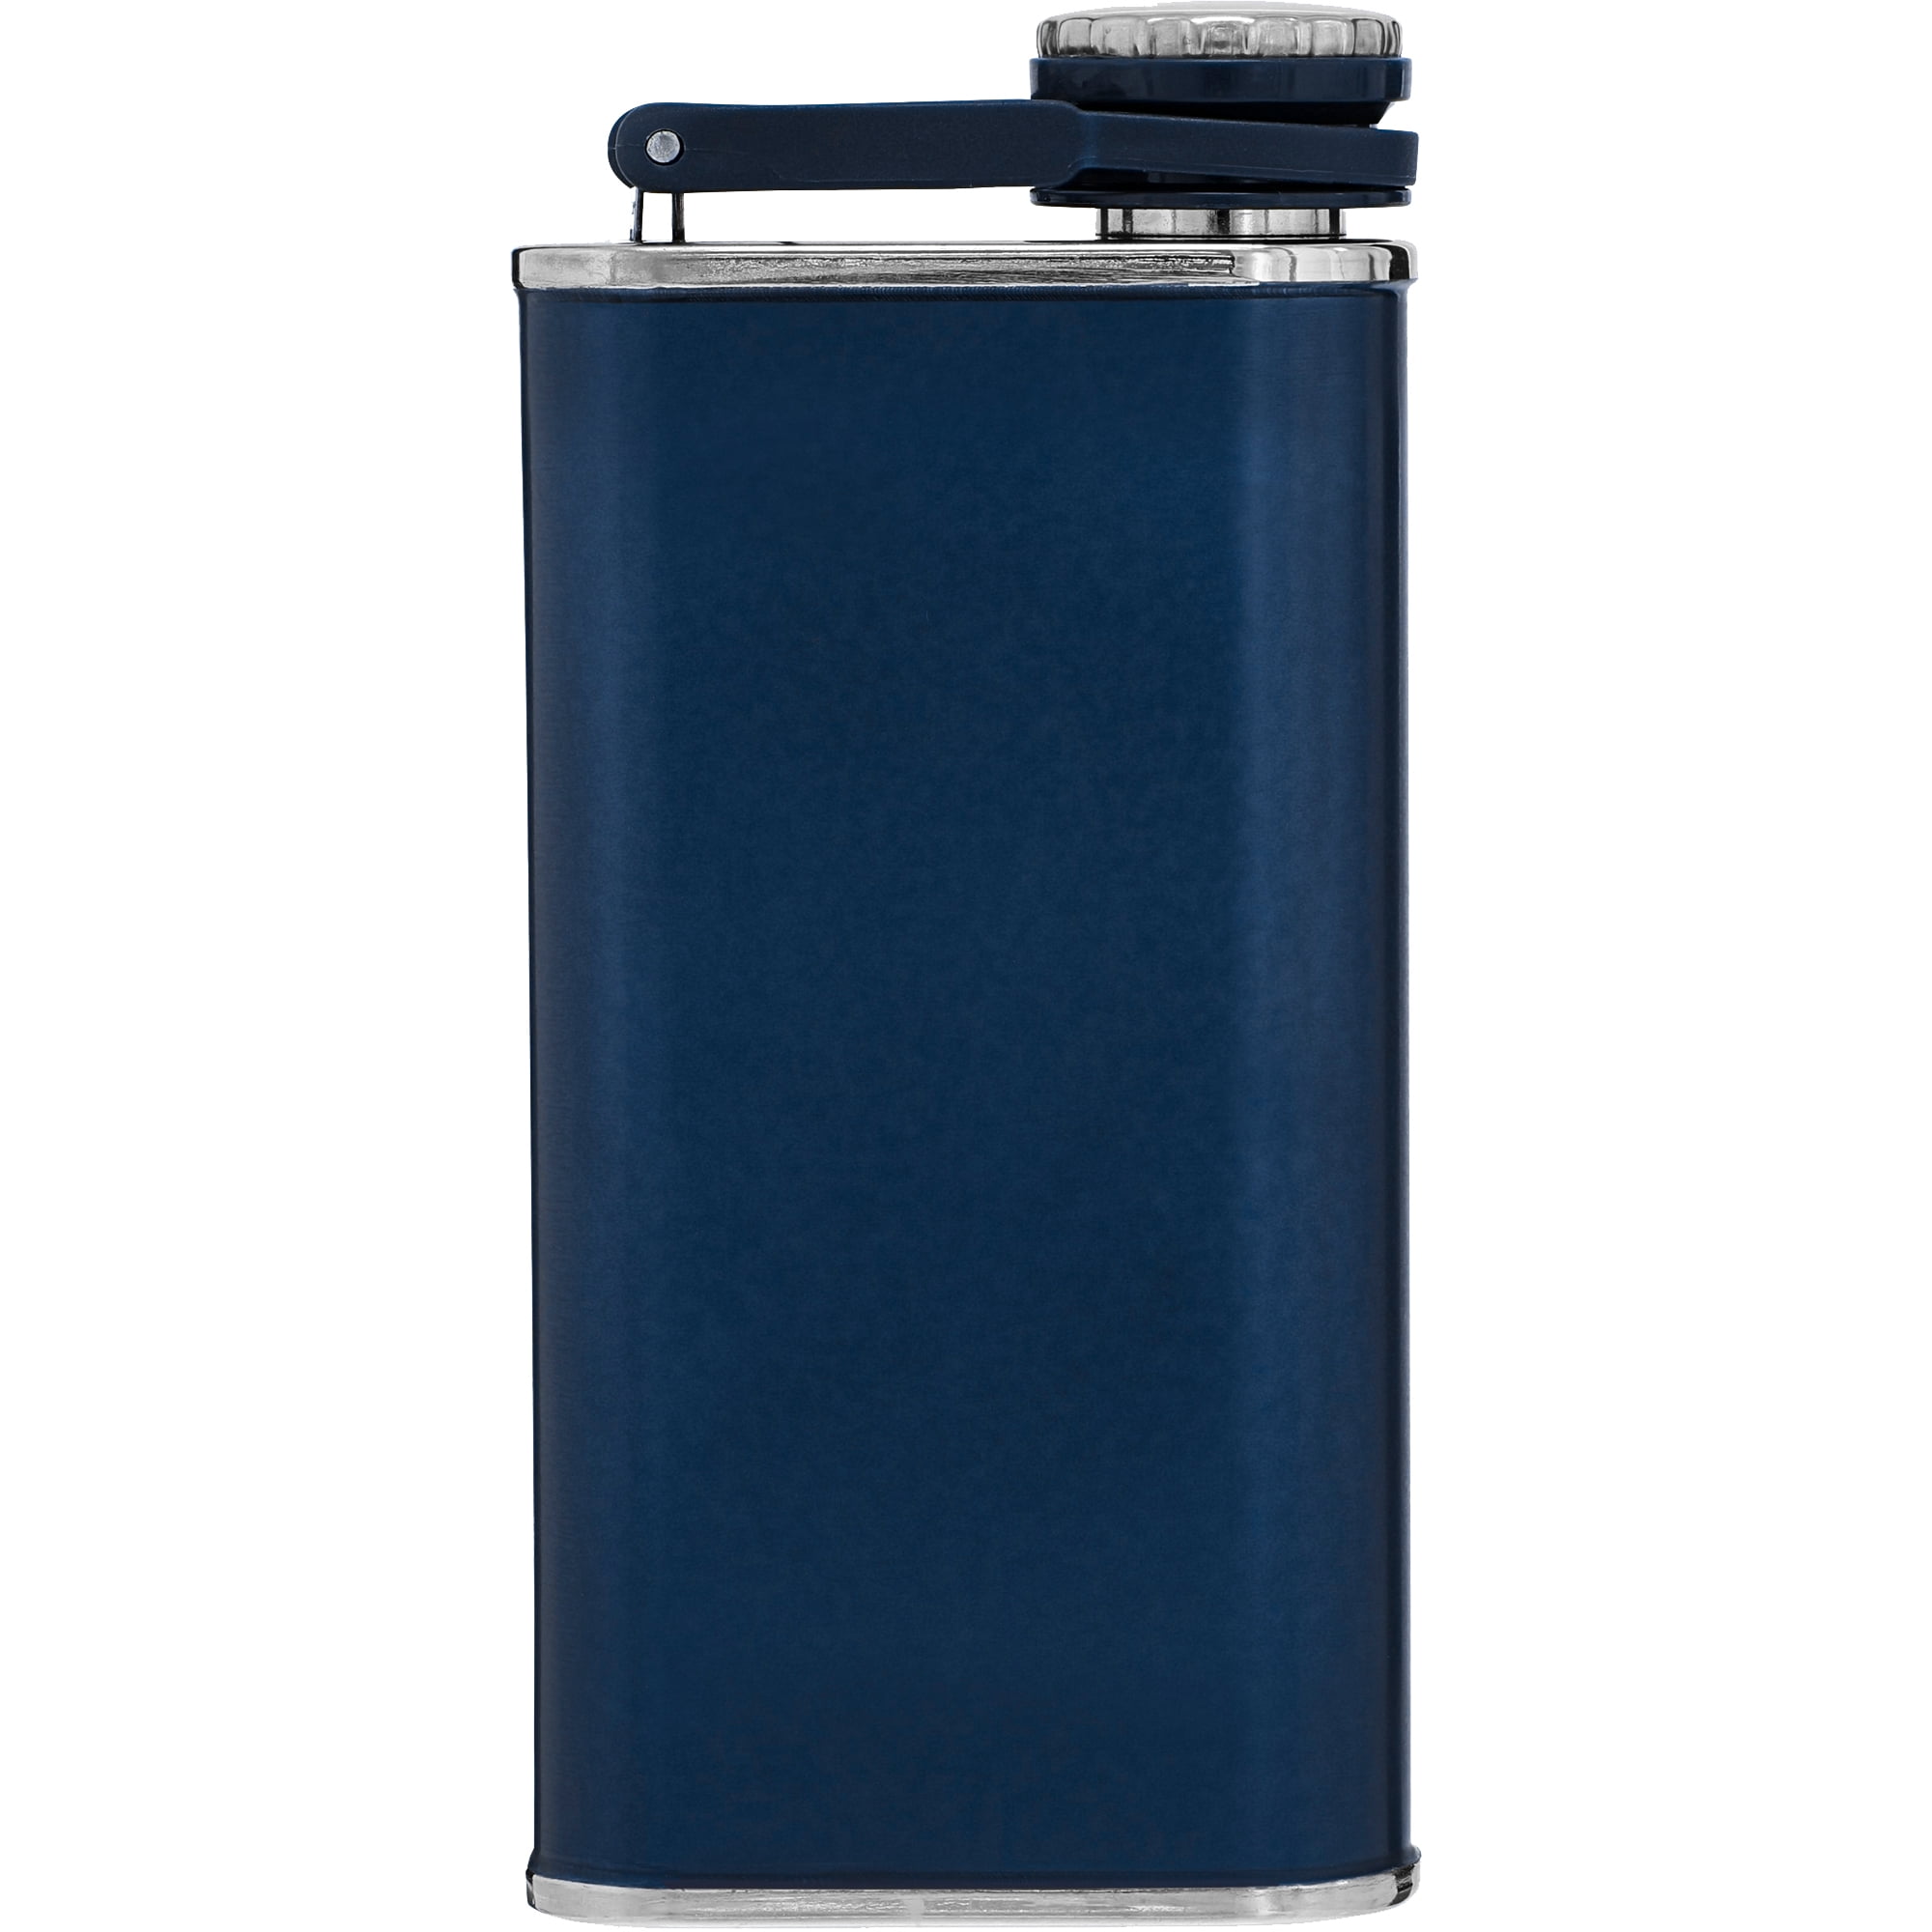 Stanley Classic Easy Fill Wide Mouth Flask at Hilton's Tent City